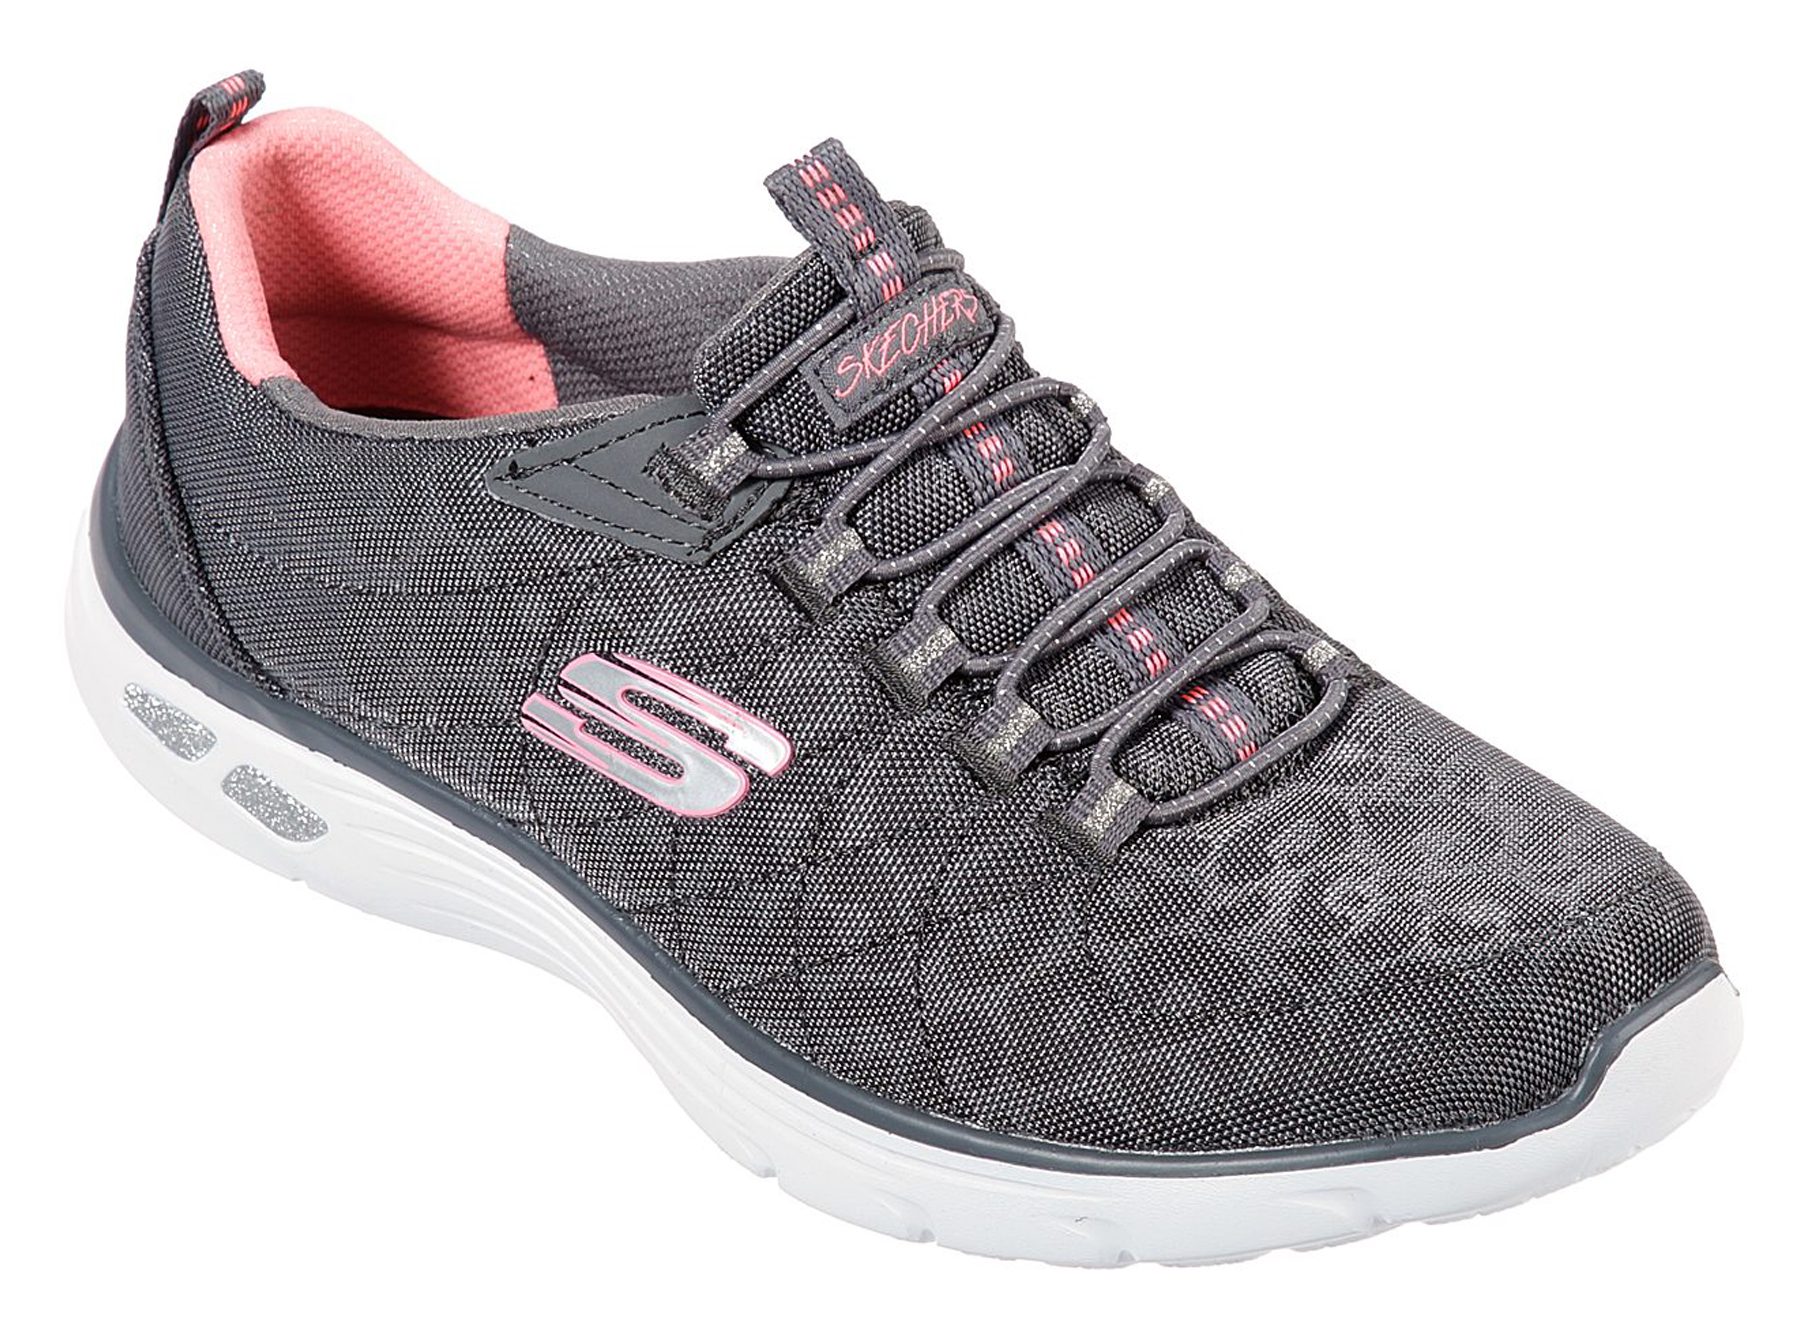 Skechers Relaxed Fit: D'Lux - Spotted Charcoal / Coral 12825 CCCL - Womens Trainers - Humphries Shoes